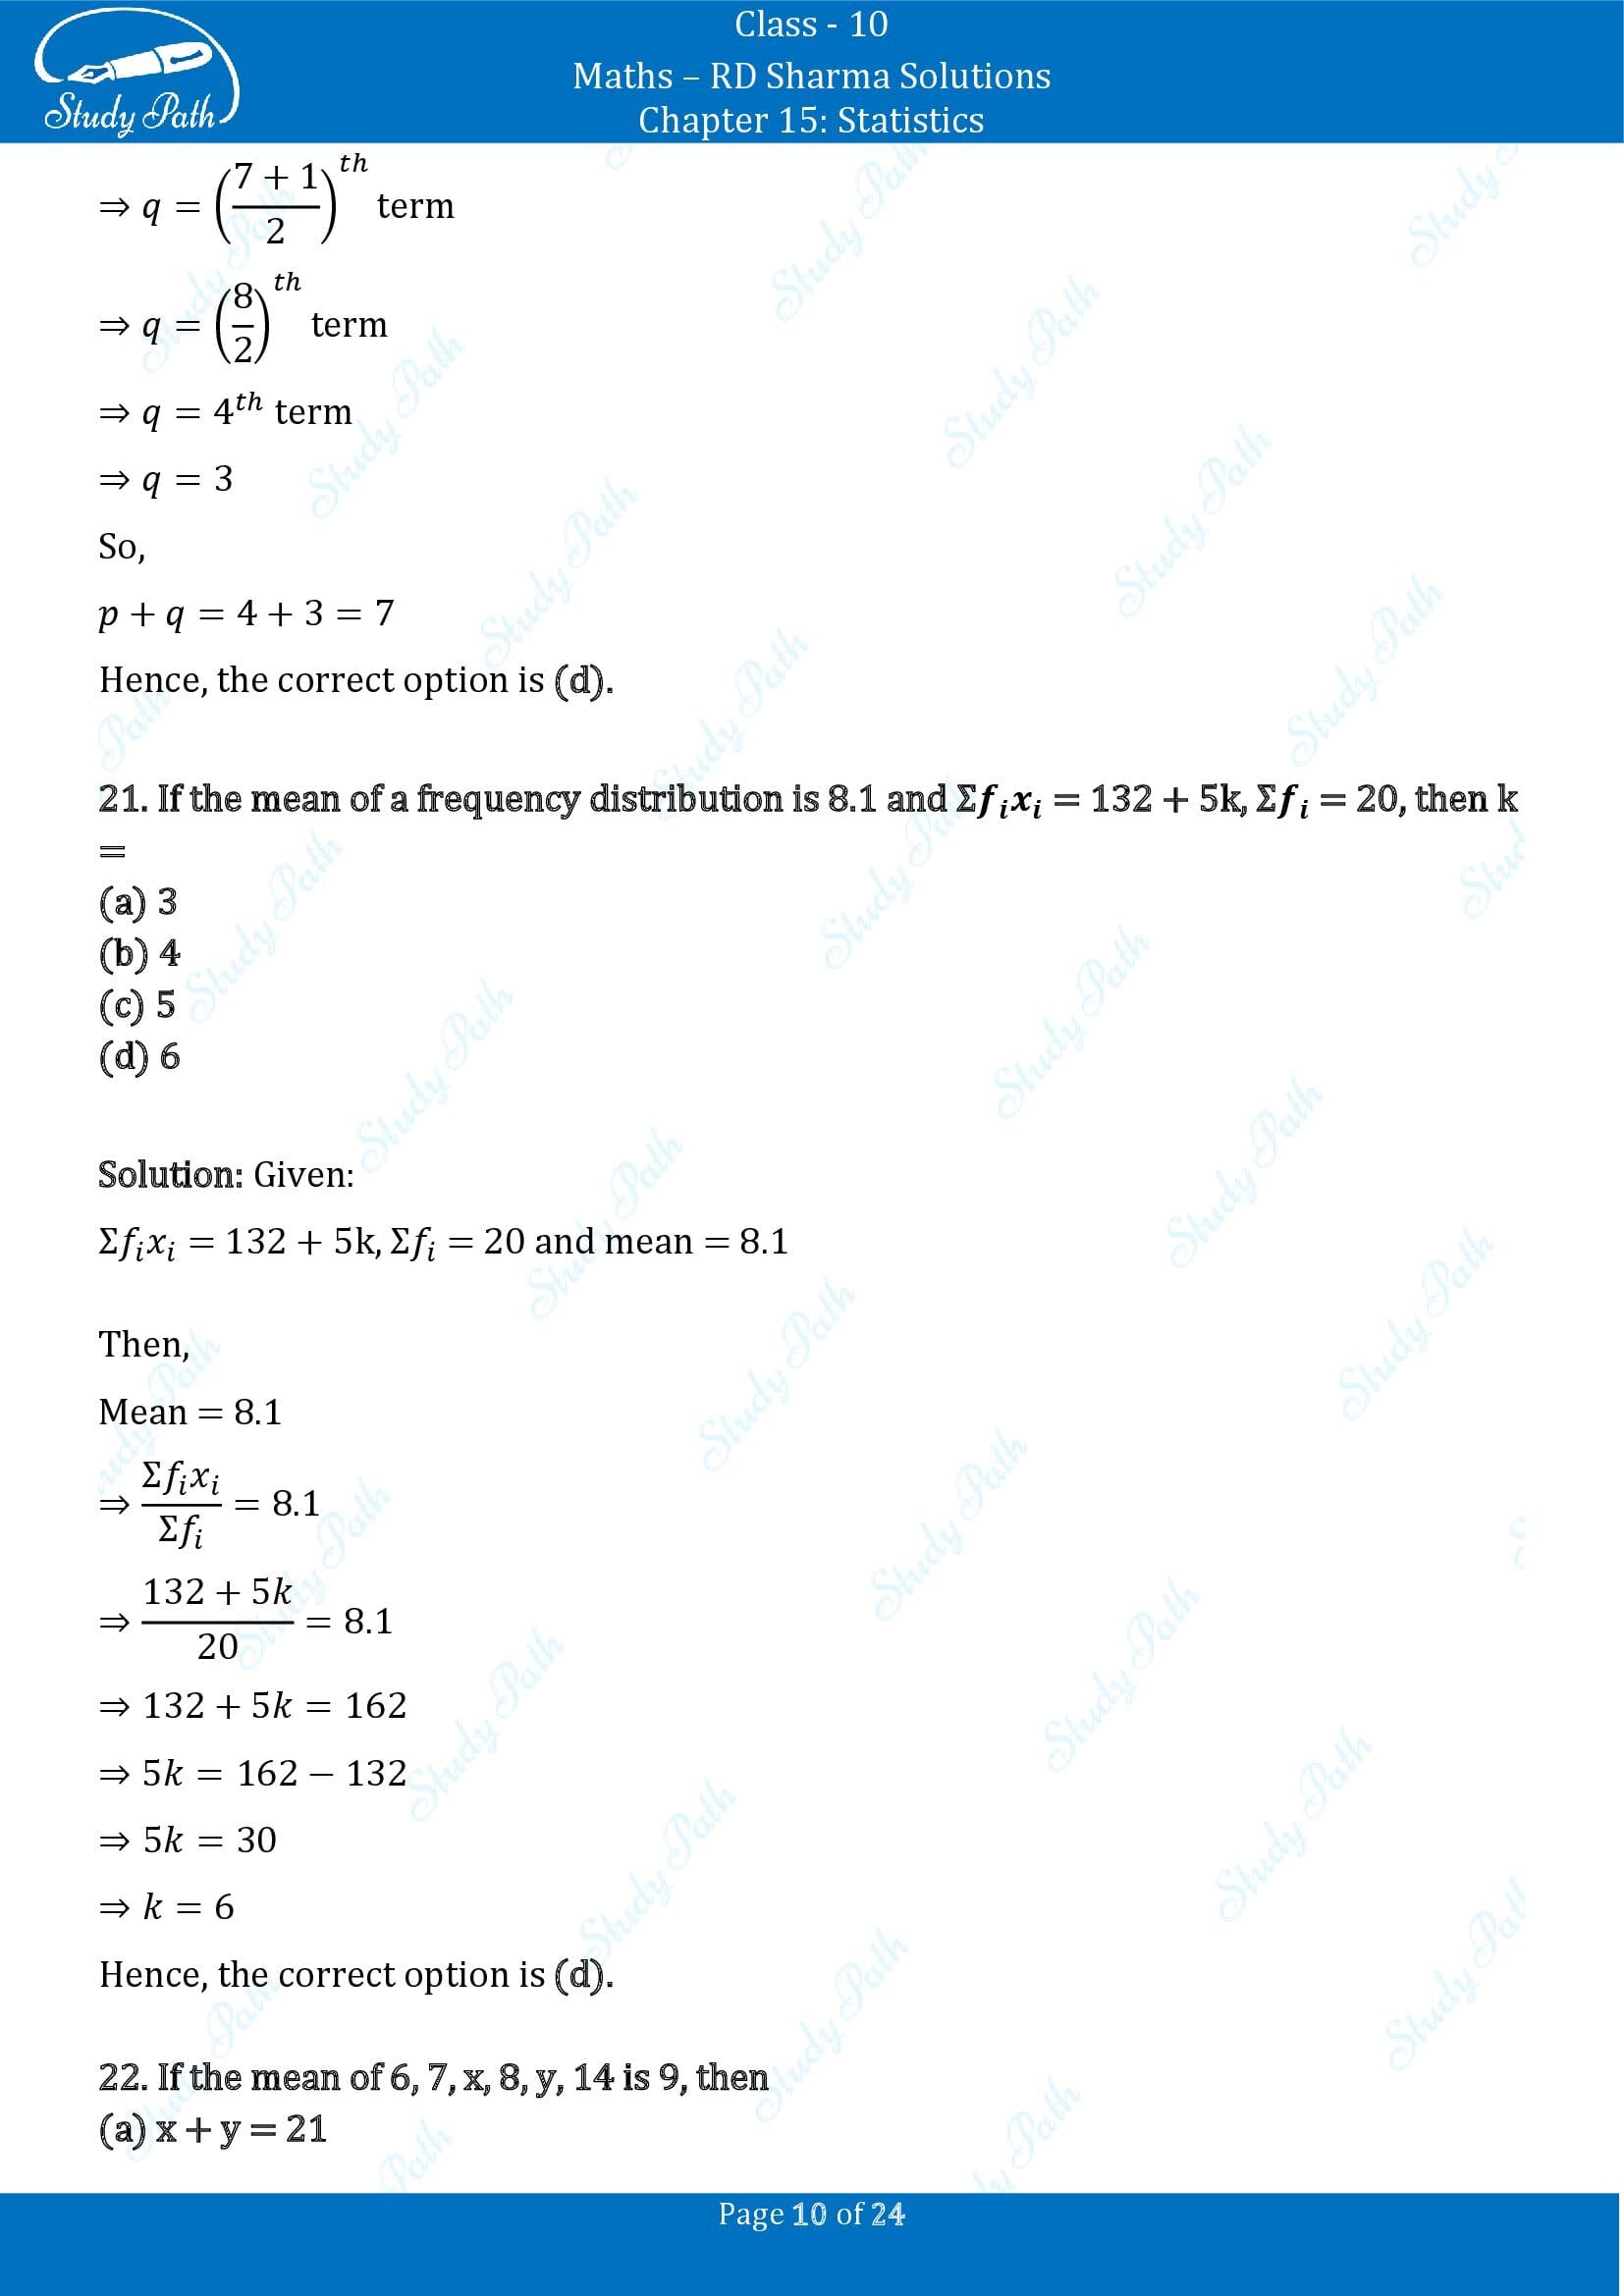 RD Sharma Solutions Class 10 Chapter 15 Statistics Multiple Choice Question MCQs 00010